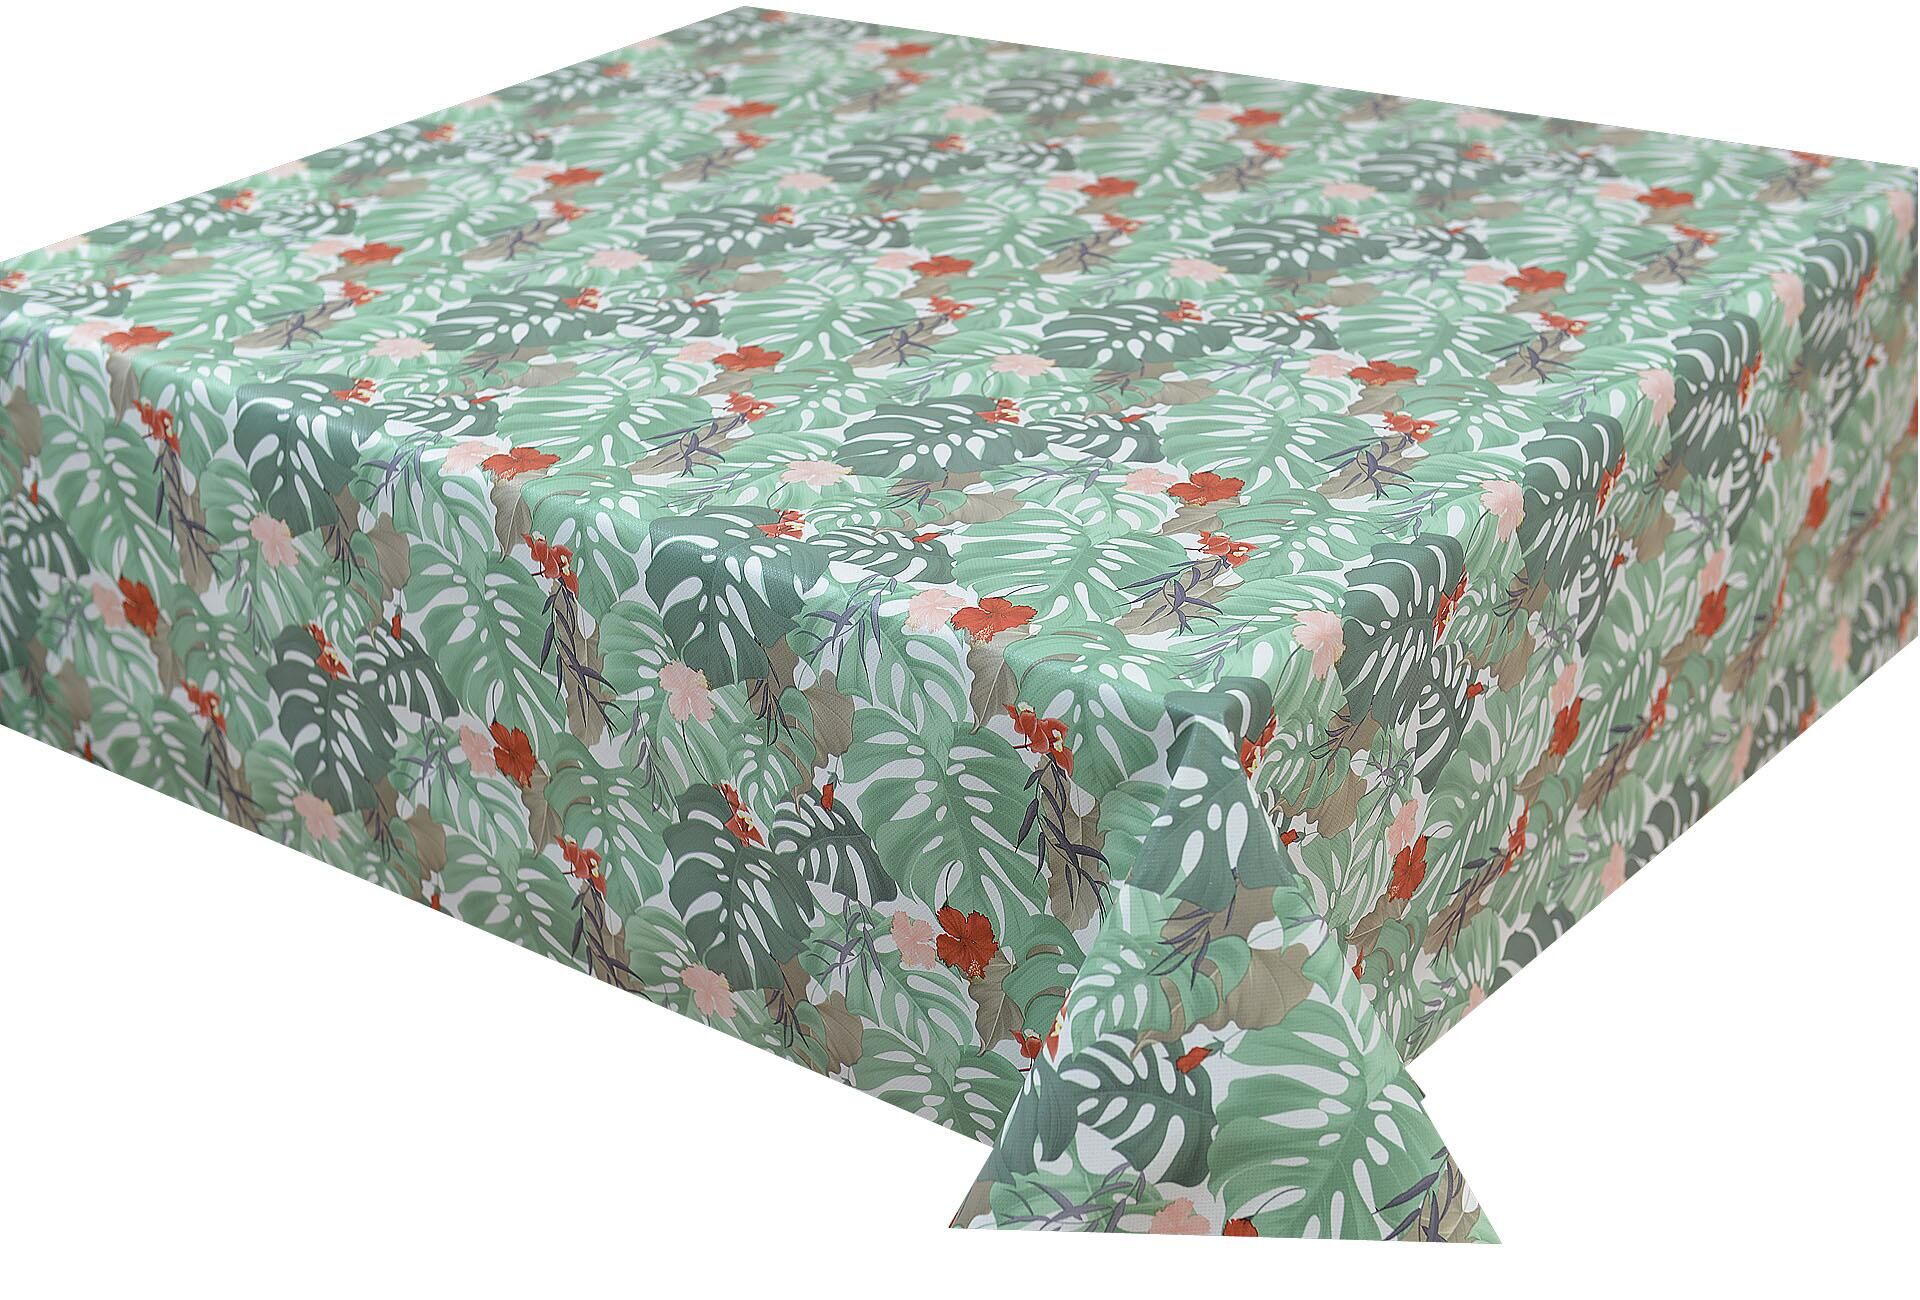 Table Cover - Printed Table Cover - Europe Design Table Cover - BS-N8233